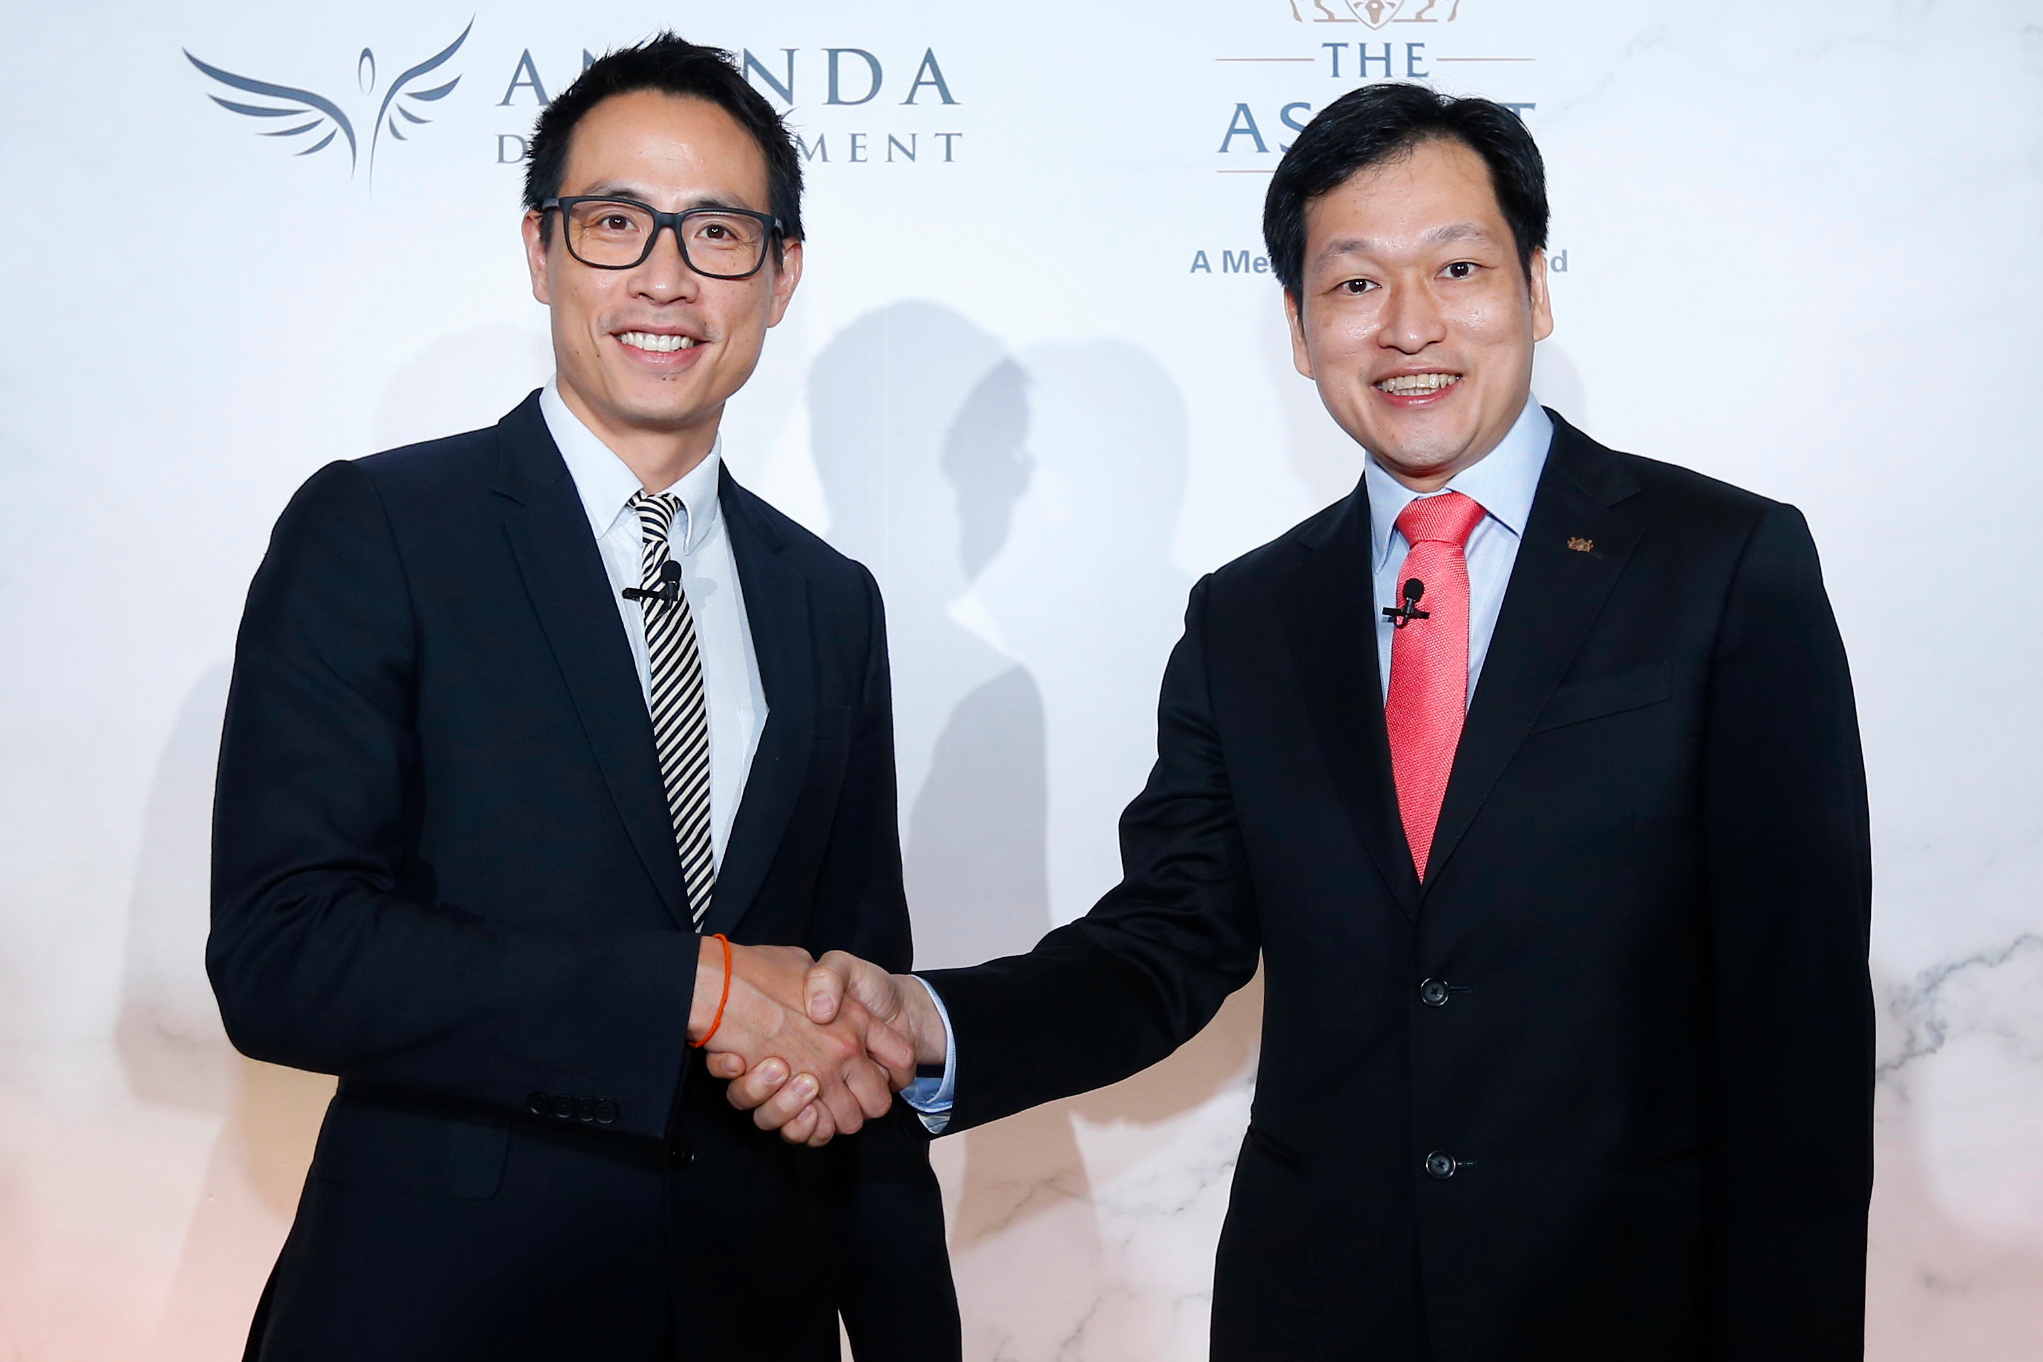 (From left) Mr Chanond Ruangkritya, President and CEO of Ananda Development with Mr Kevin Goh, CEO of Ascott. Click to enlarge.